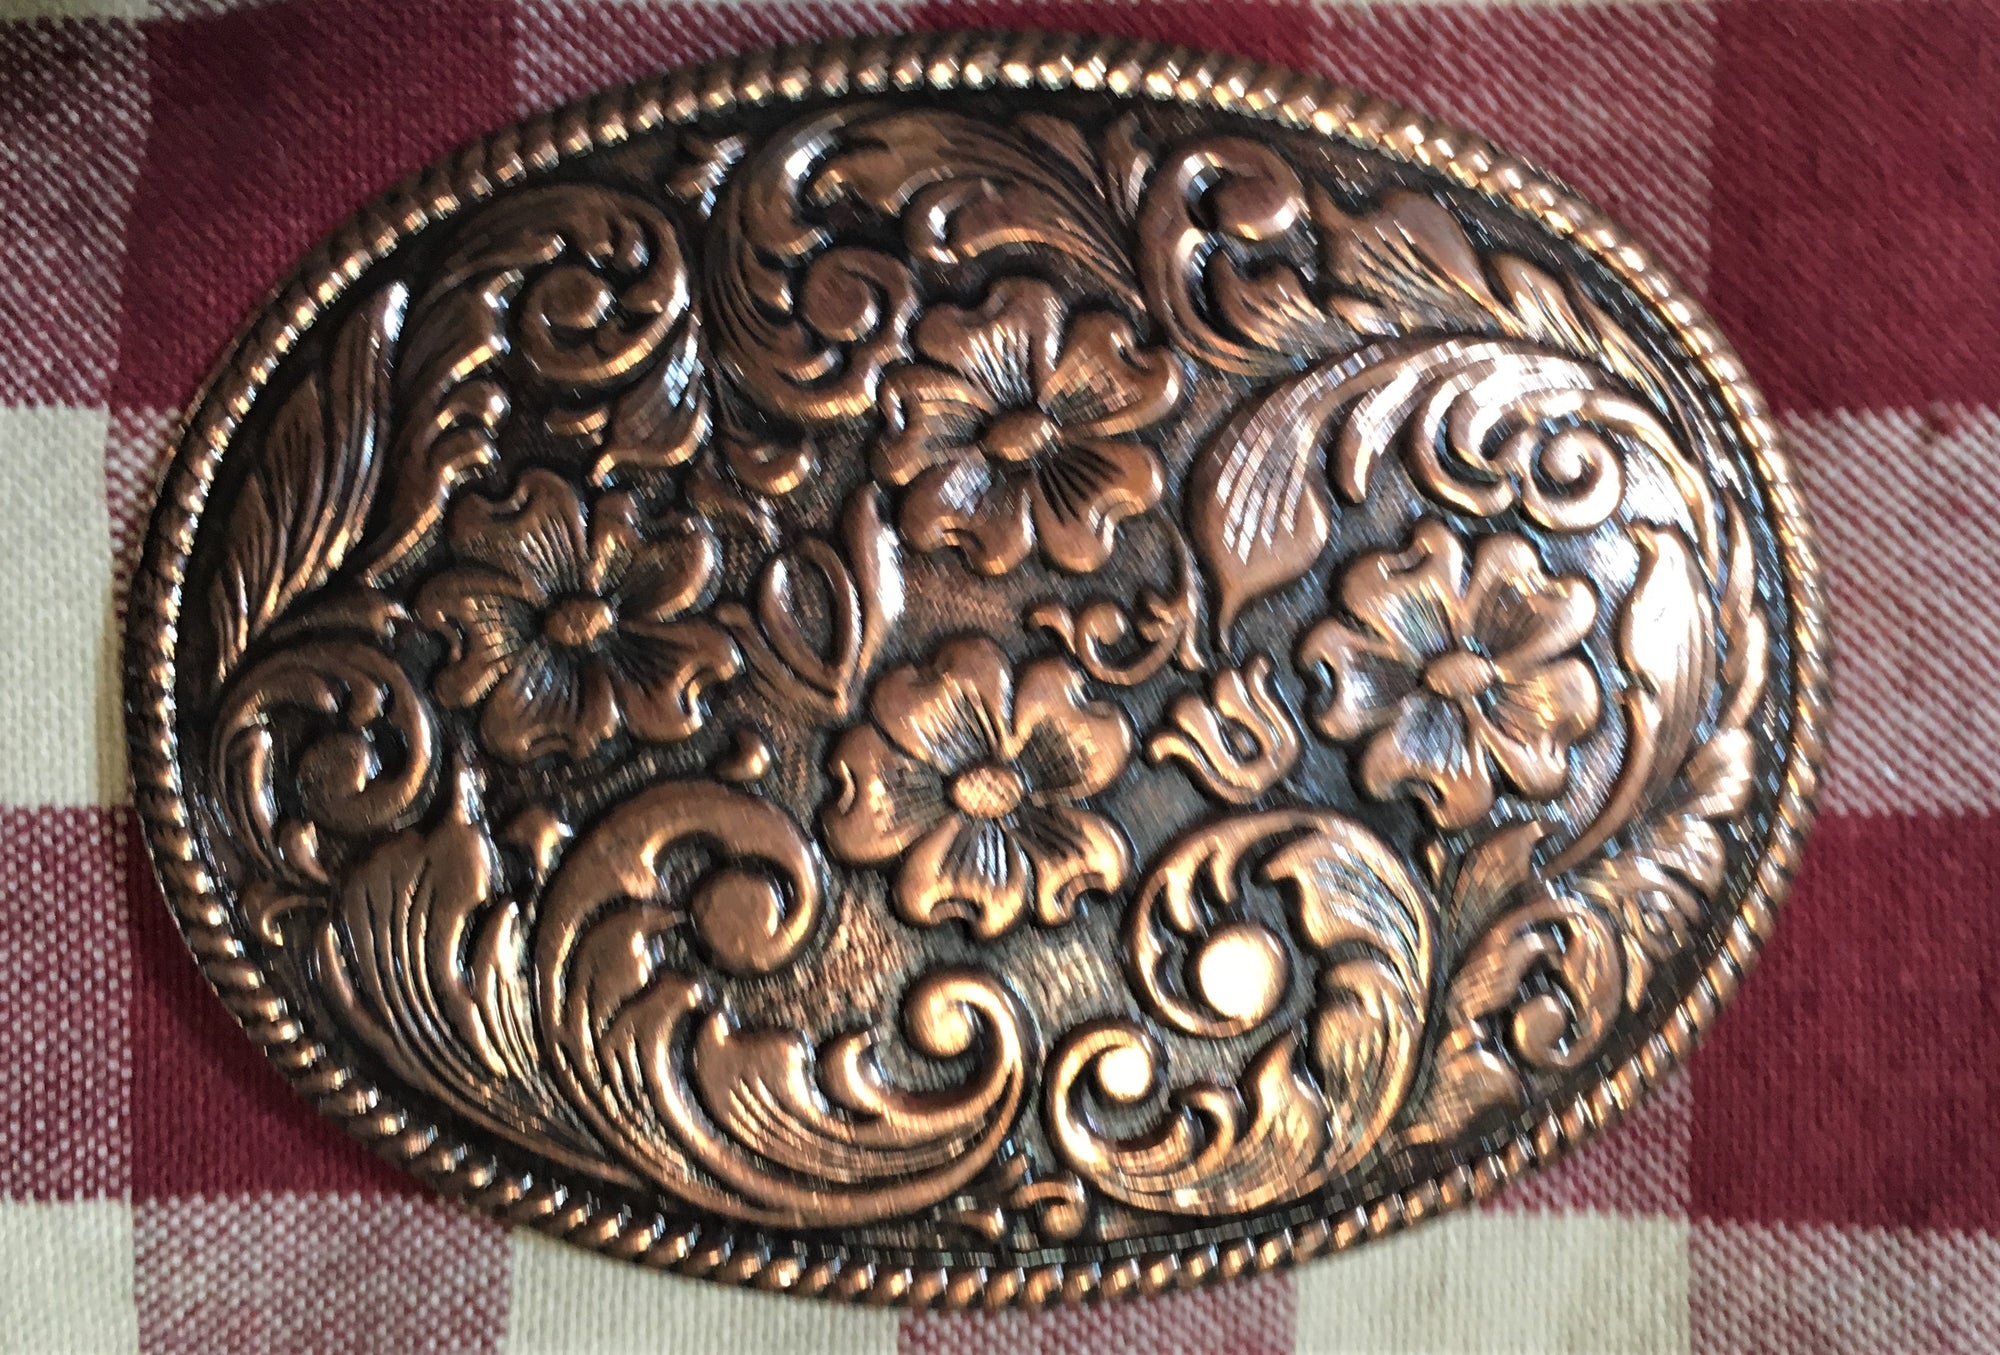 Trophy Buckle Oval with Dark Background and  Copper Tone Flowers